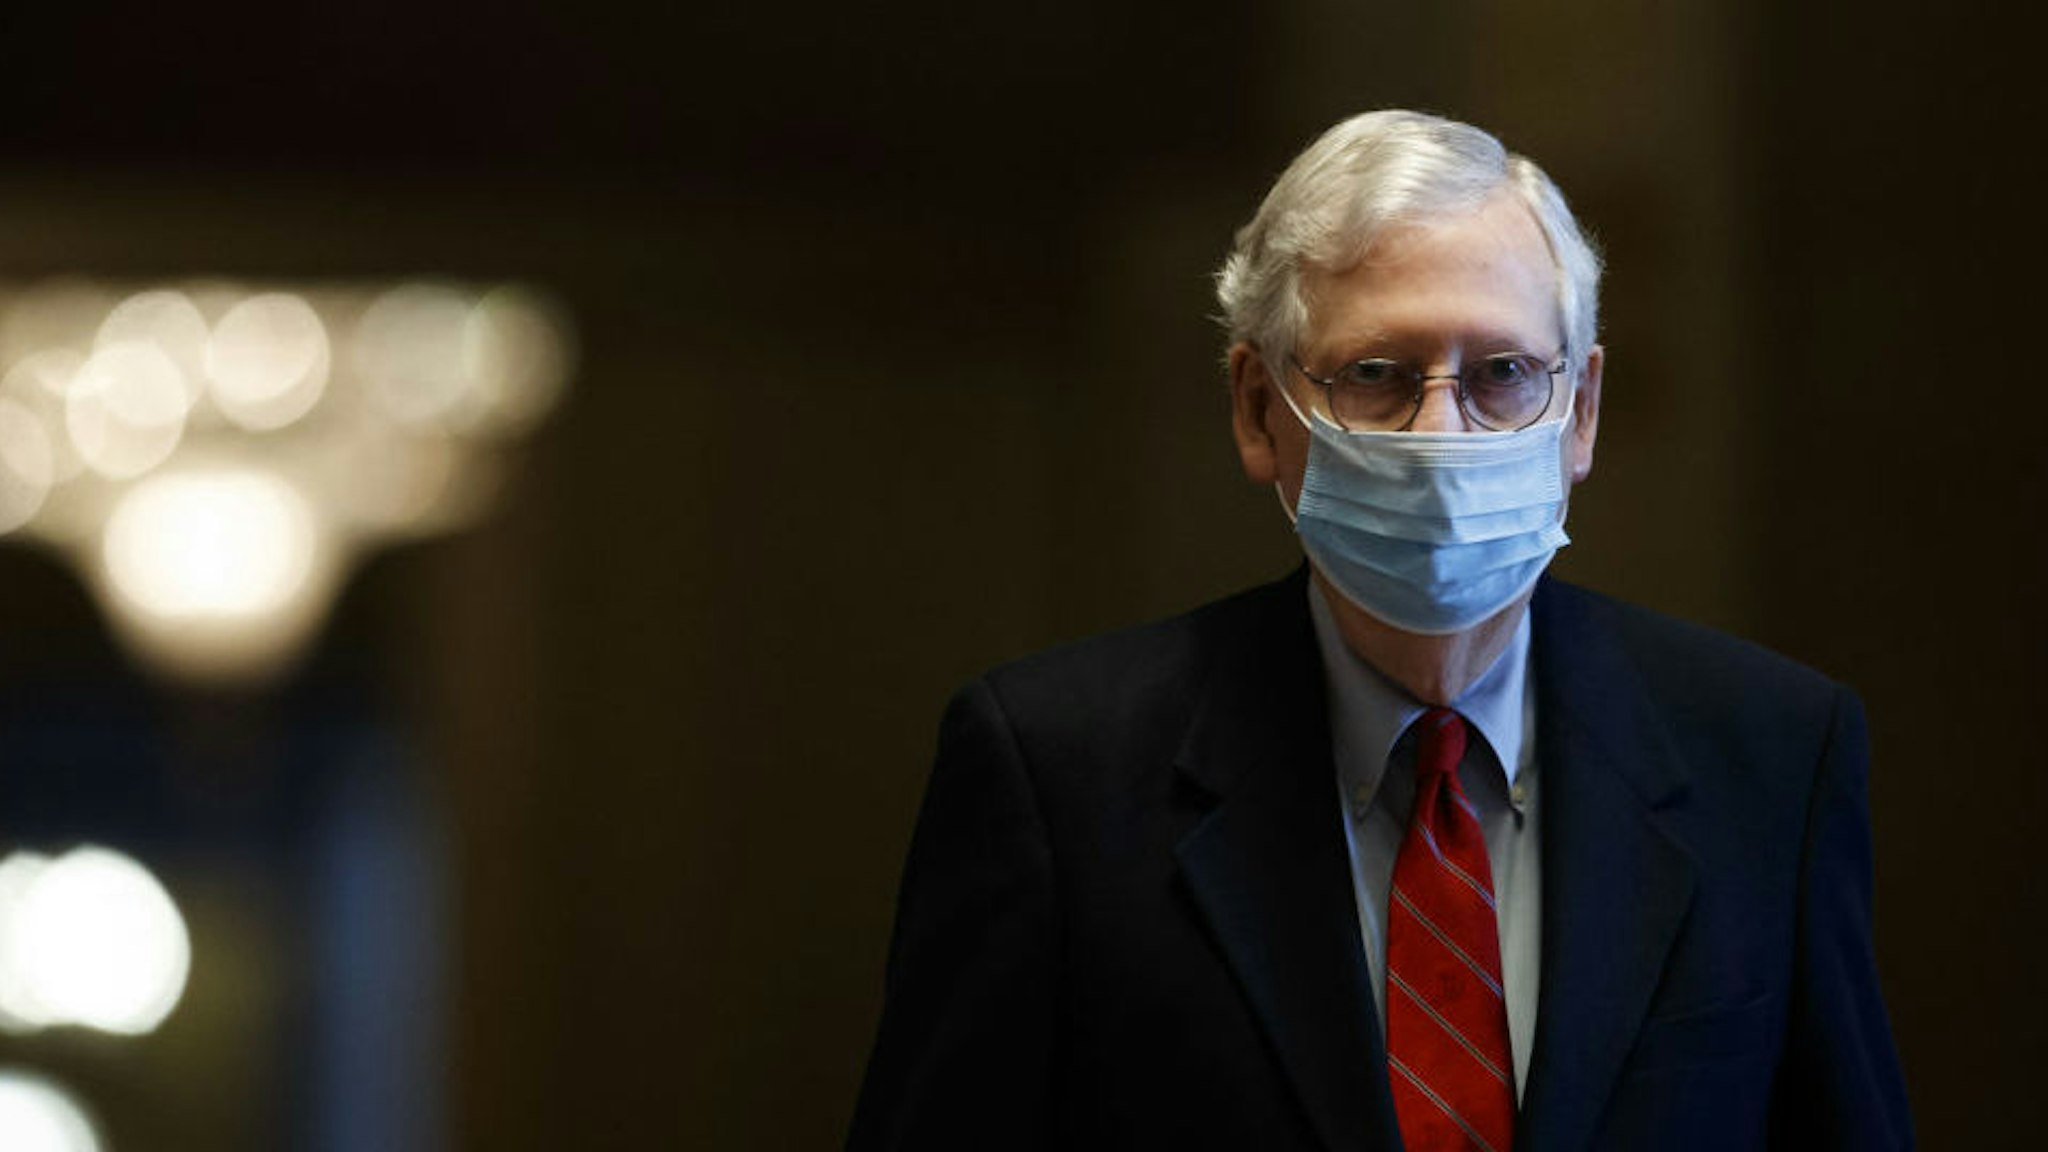 Senate Majority Leader Mitch McConnell, a Republican from Kentucky, wears a protective mask while walking through the U.S. Capitol Building in Washington, D.C., U.S., on Sunday, Dec. 20, 2020. Congressional negotiators cleared the last significant obstacle for pandemic relief legislation with a compromise in a dispute over the future of Federal Reserve emergency lending programs, setting up a possible vote on Sunday.